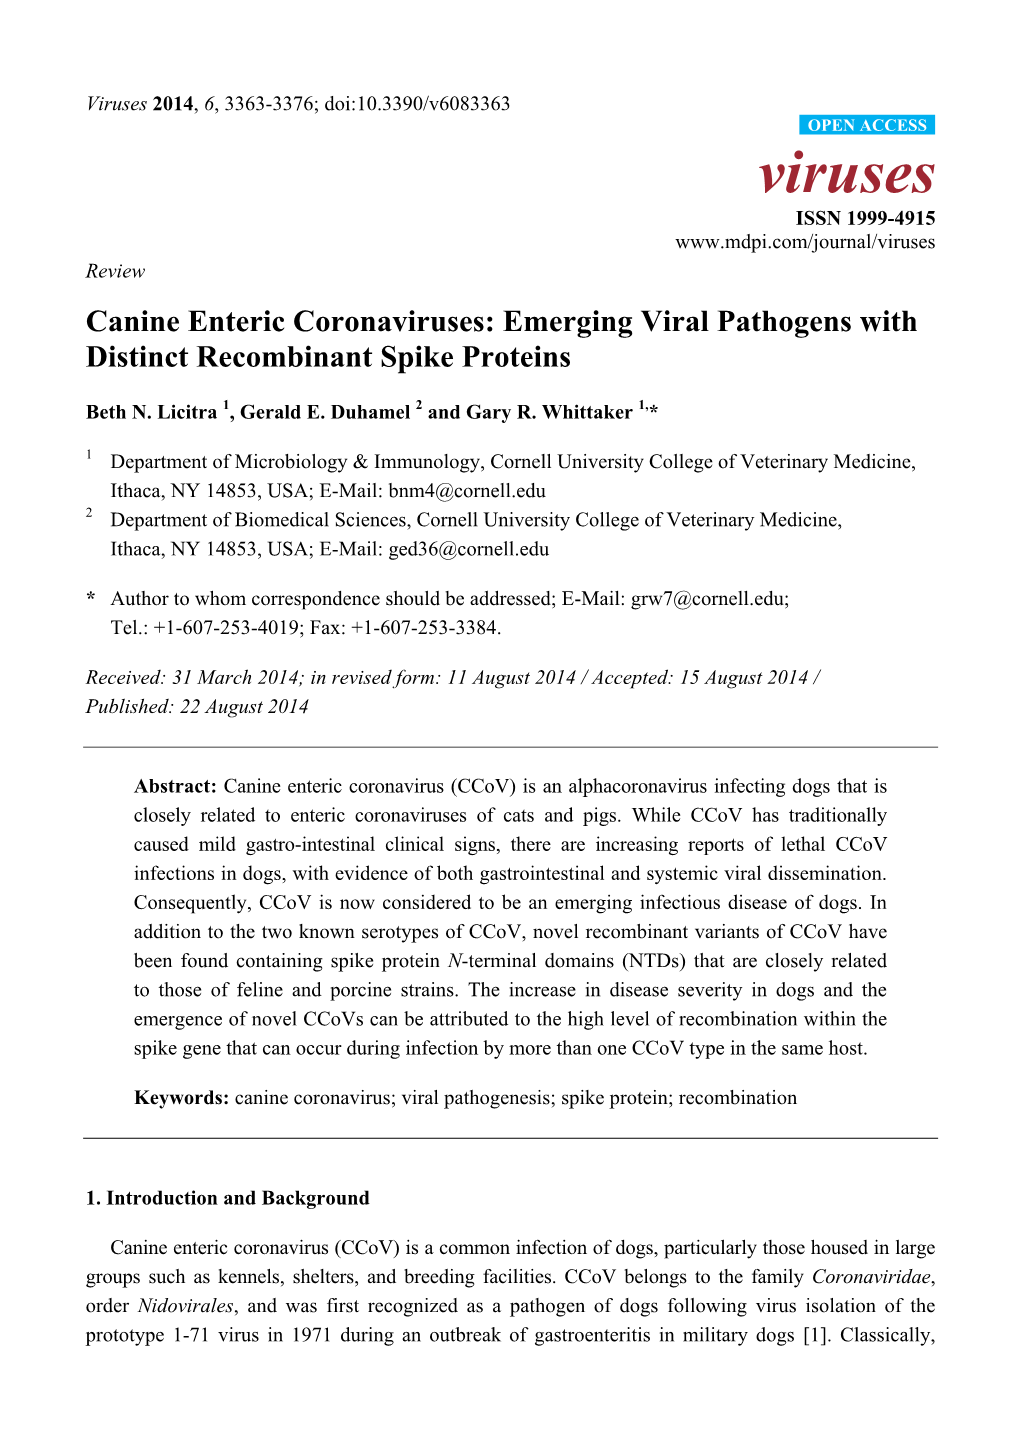 Emerging Viral Pathogens with Distinct Recombinant Spike Proteins